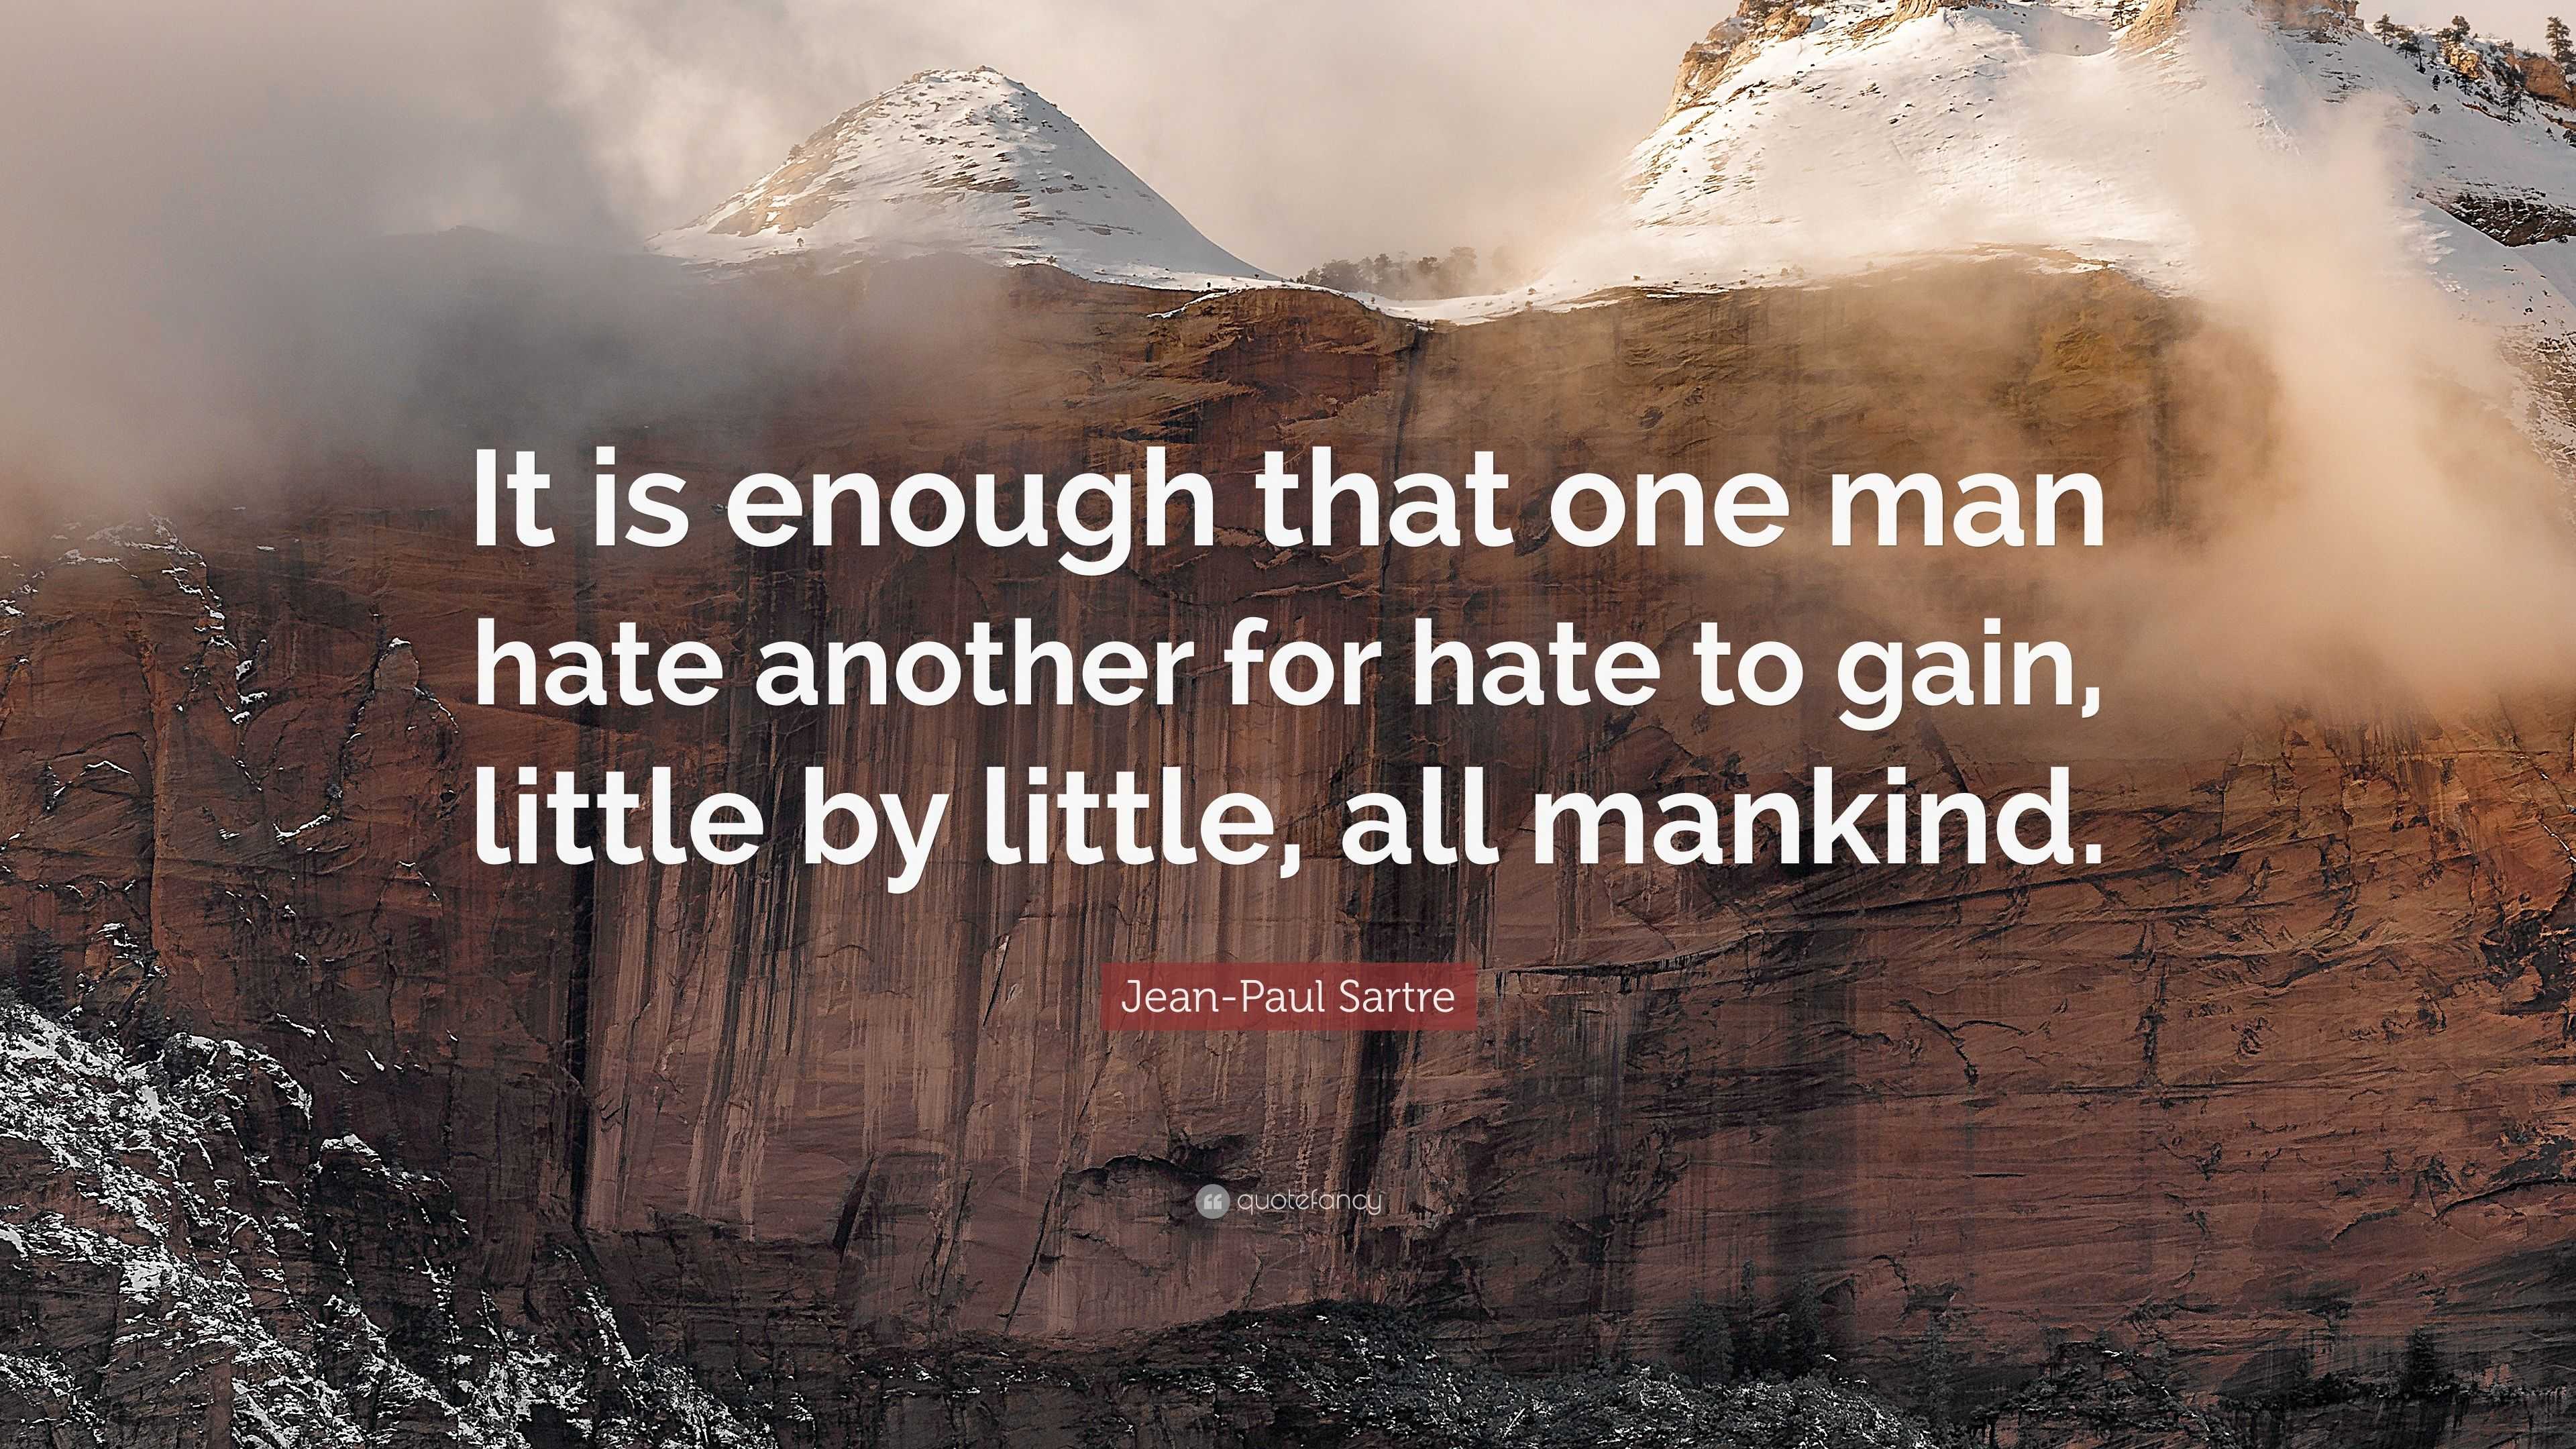 Jean-Paul Sartre Quote: "It is enough that one man hate another for hate to gain, little by ...